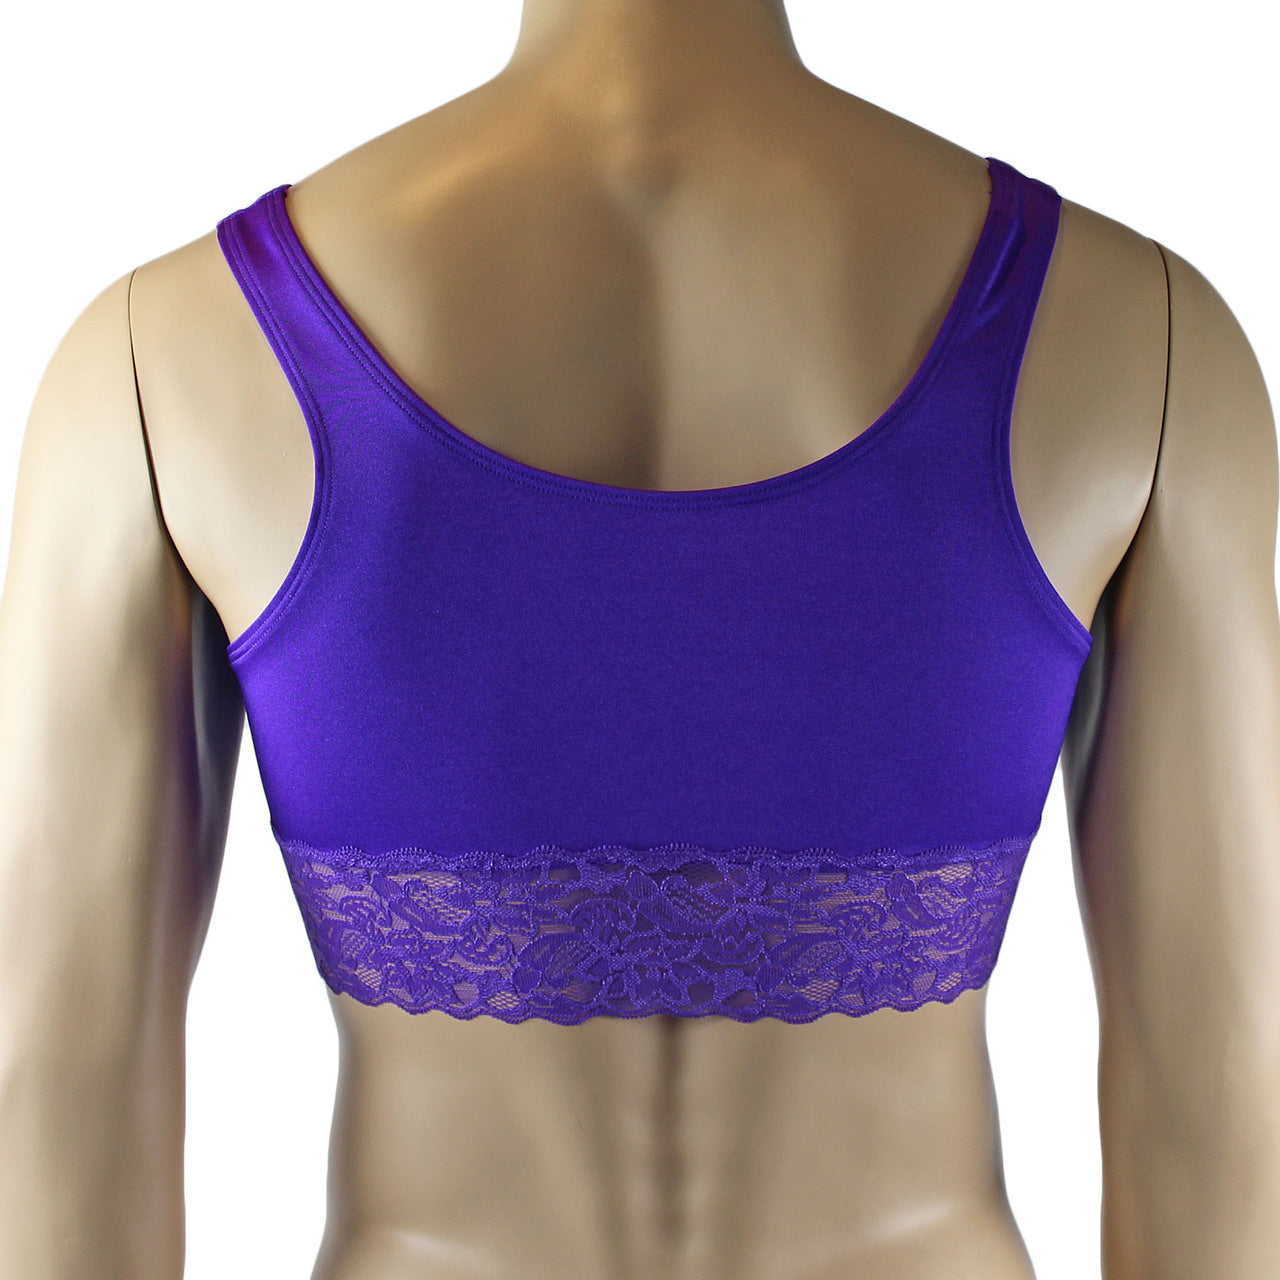 Male Lingerie Bra Camisole Top with Lace (purple plus other colours)